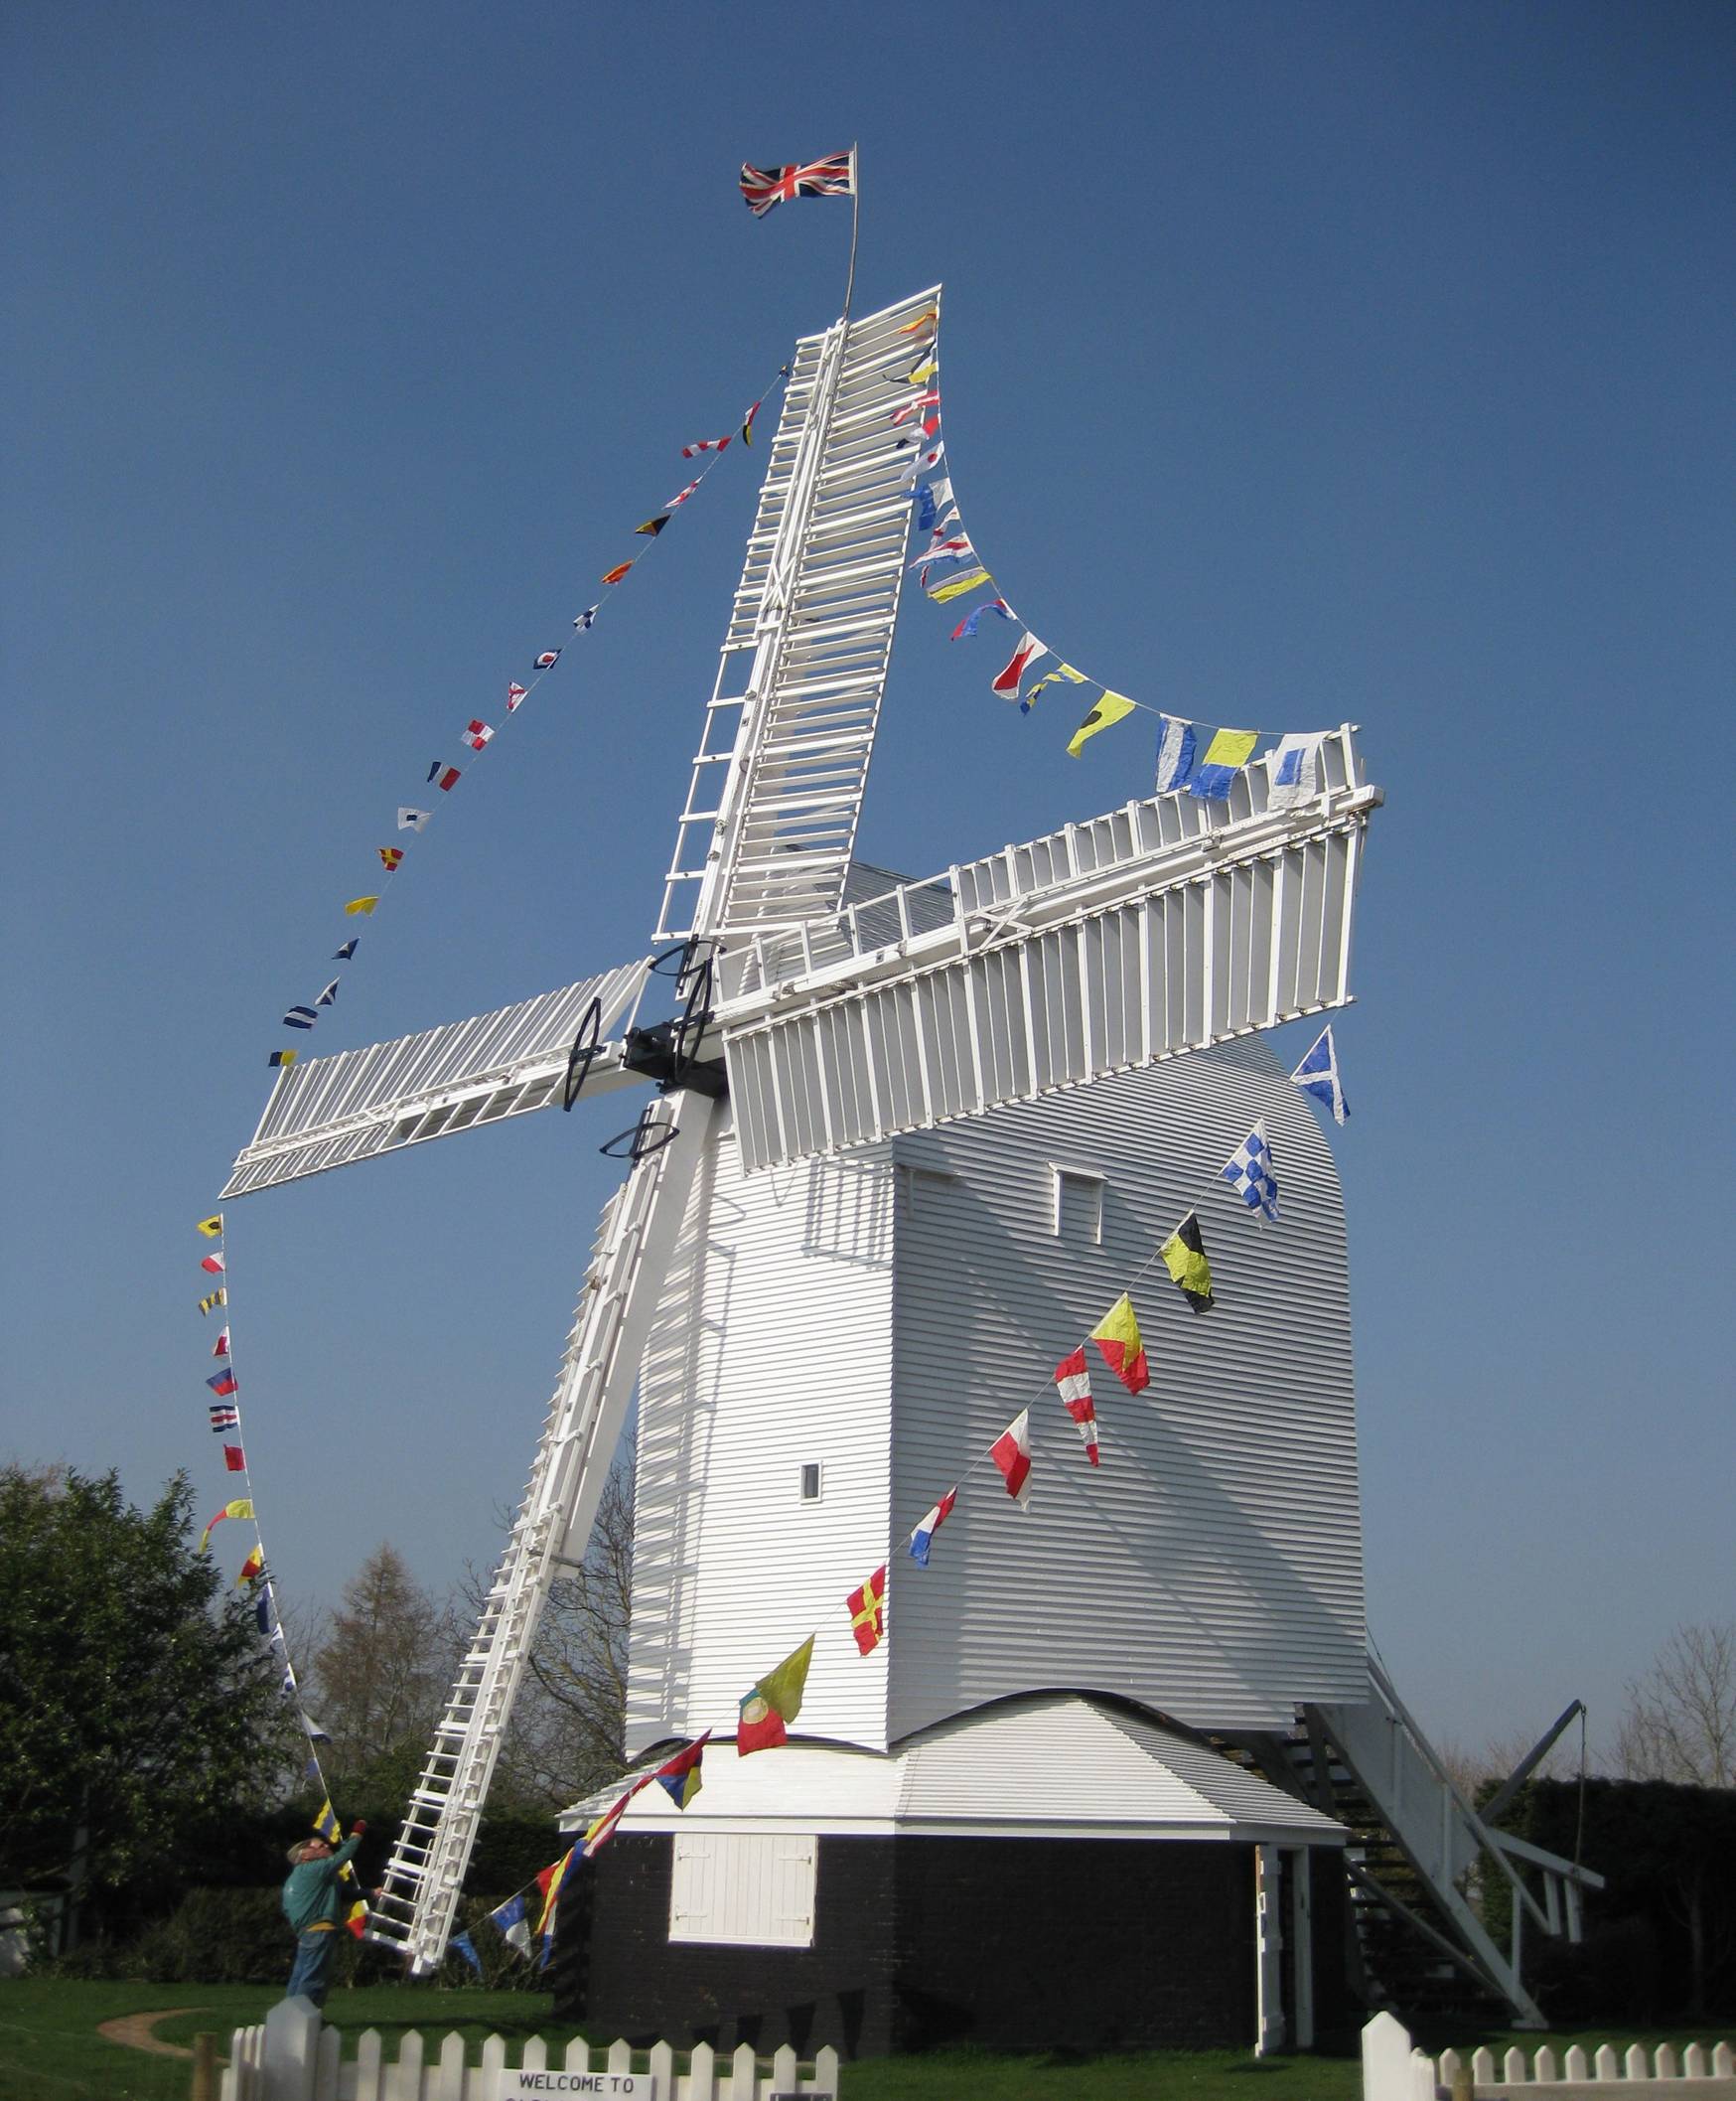 paint for working windmills